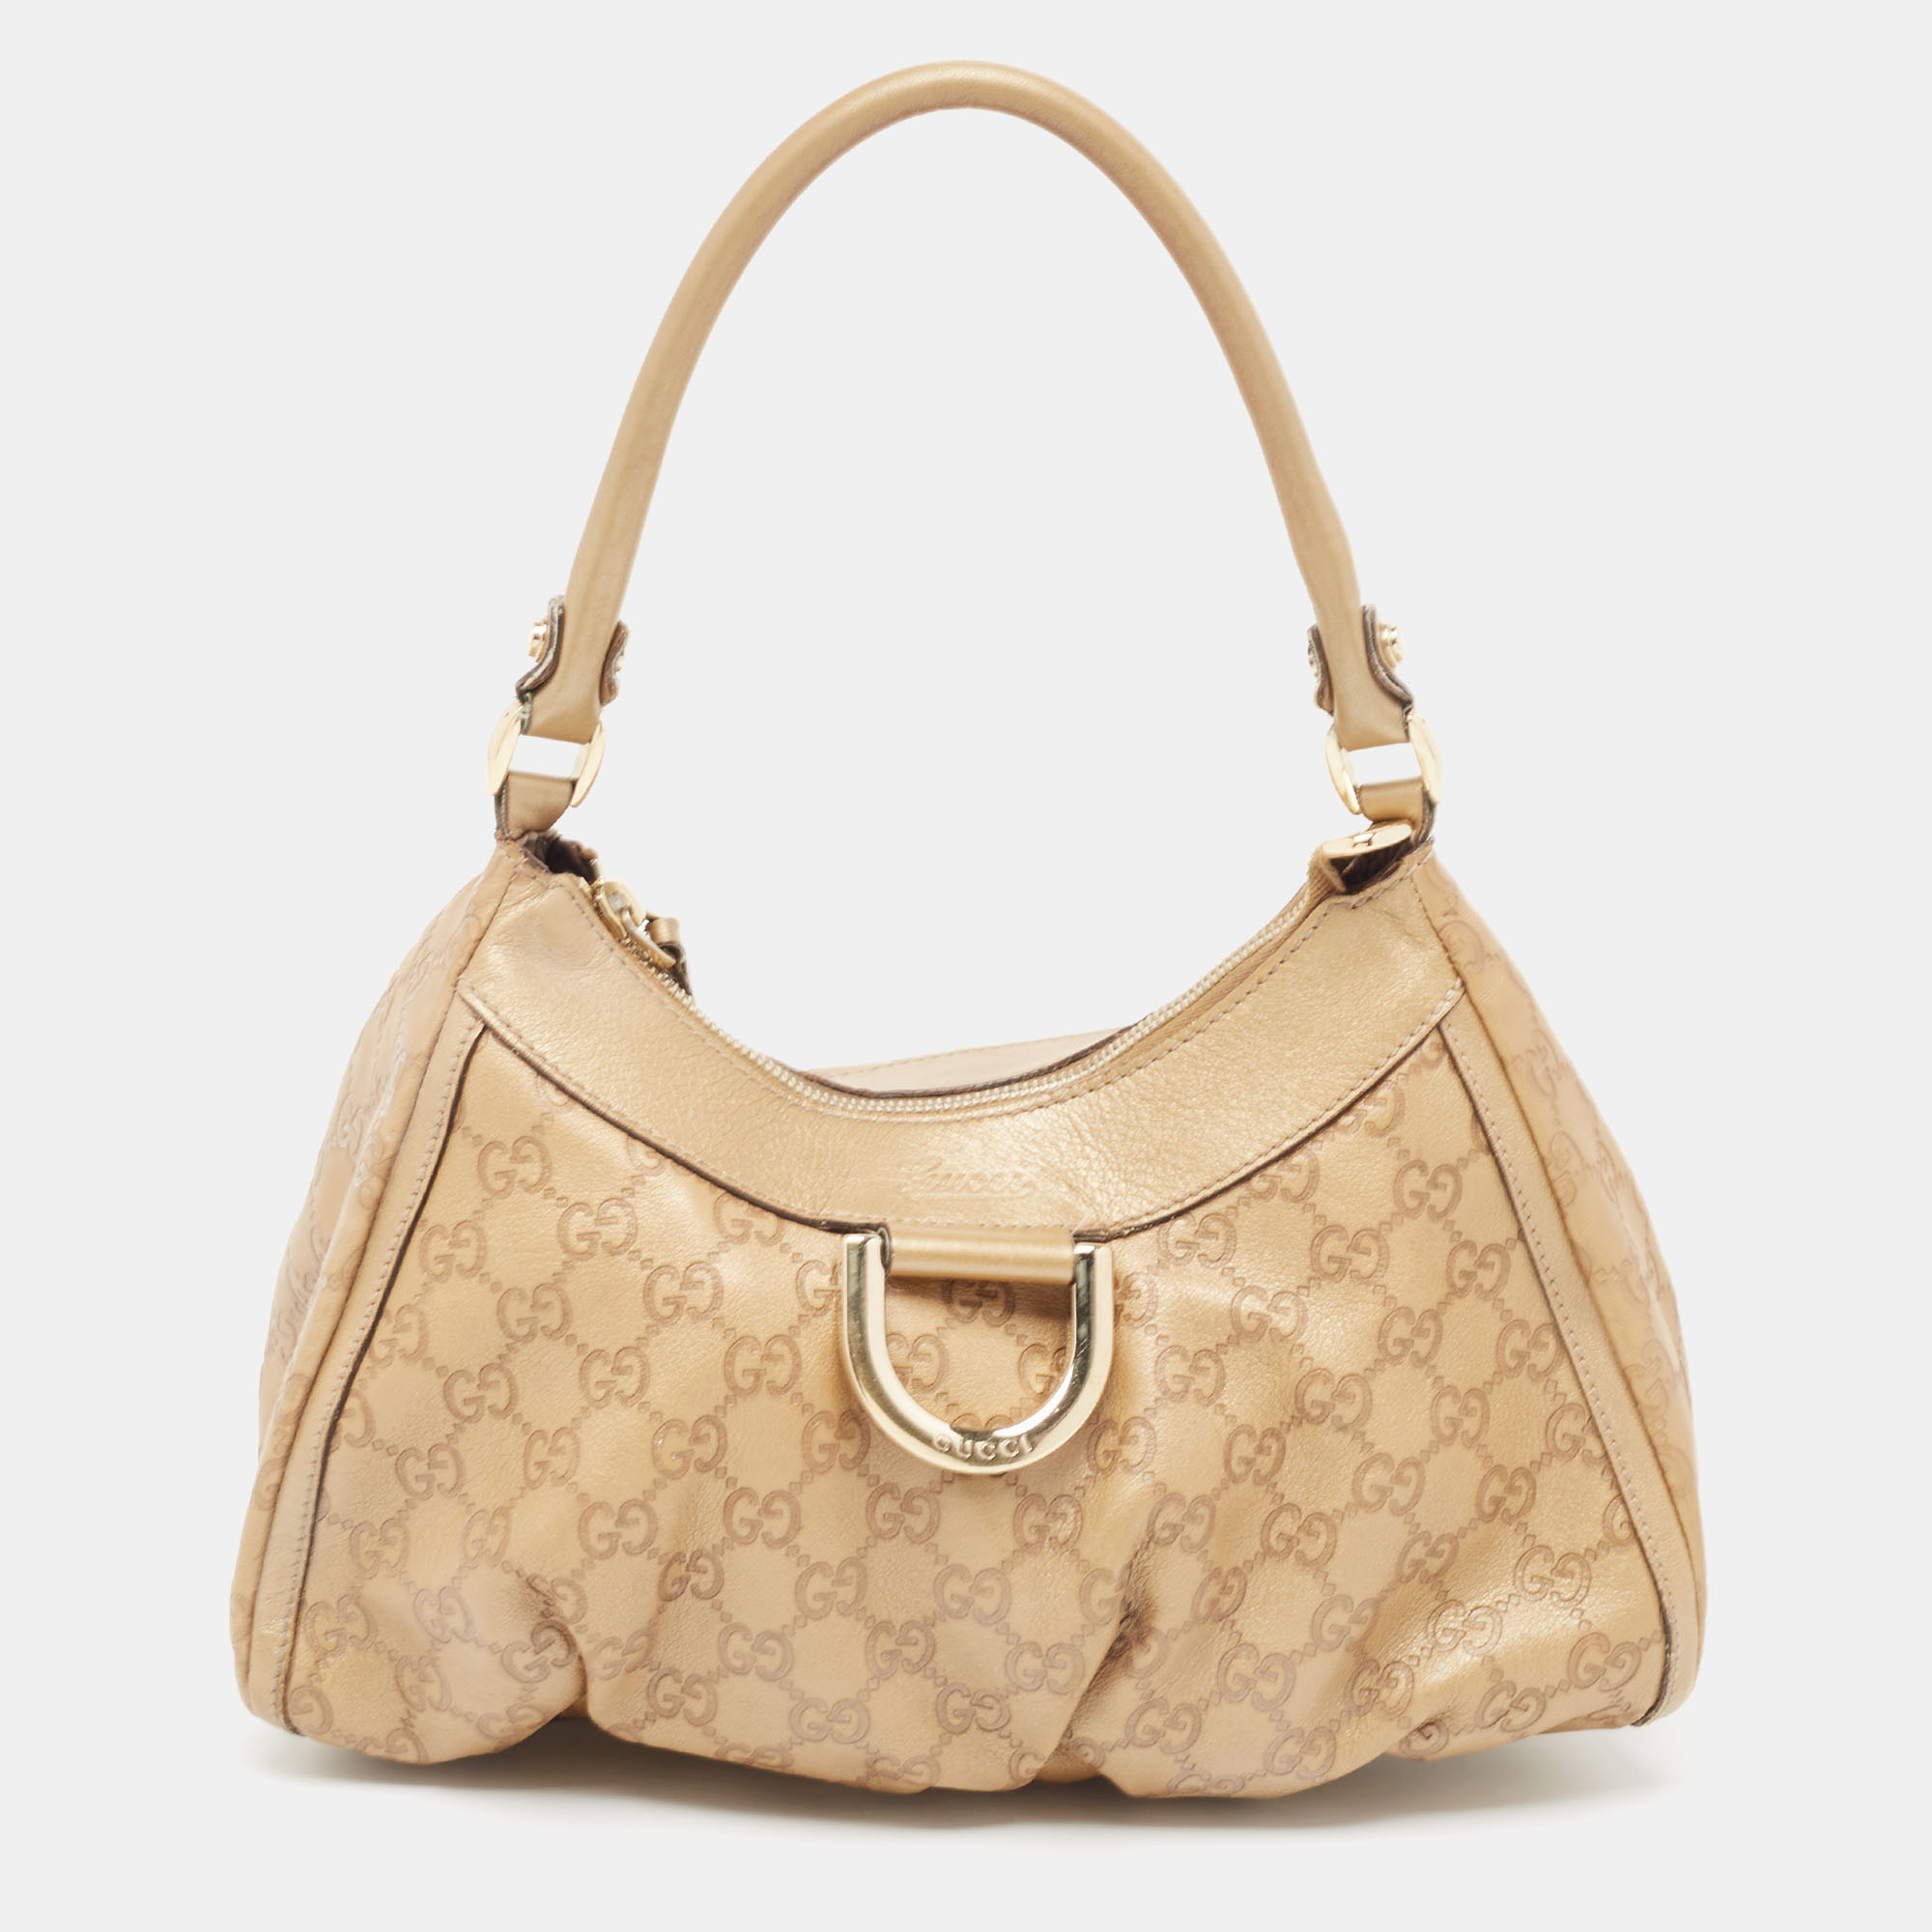 Gucci gold guccissima leather abbey d-ring hobo